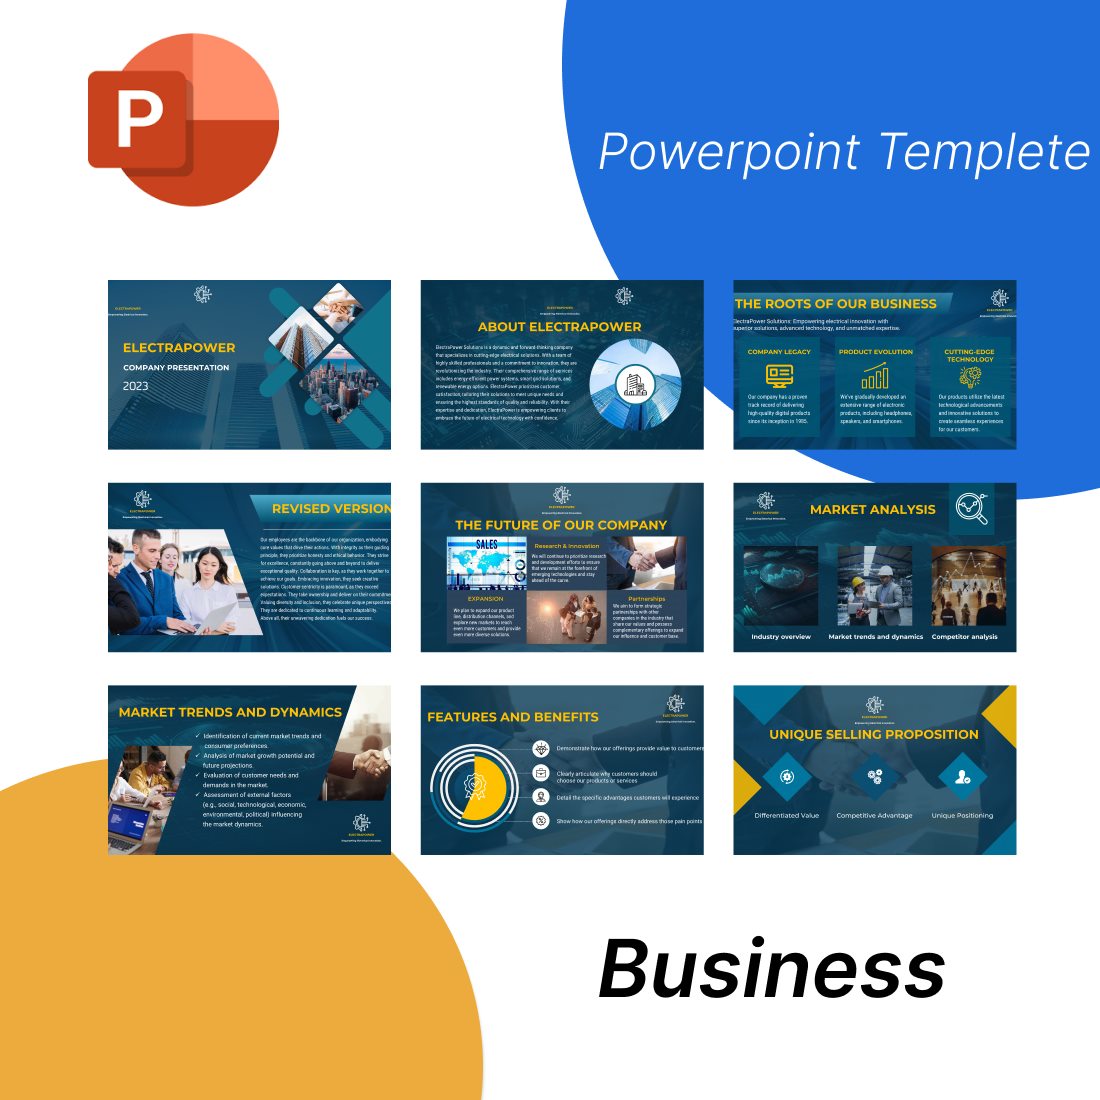 Business PowerPoint Templates preview image.